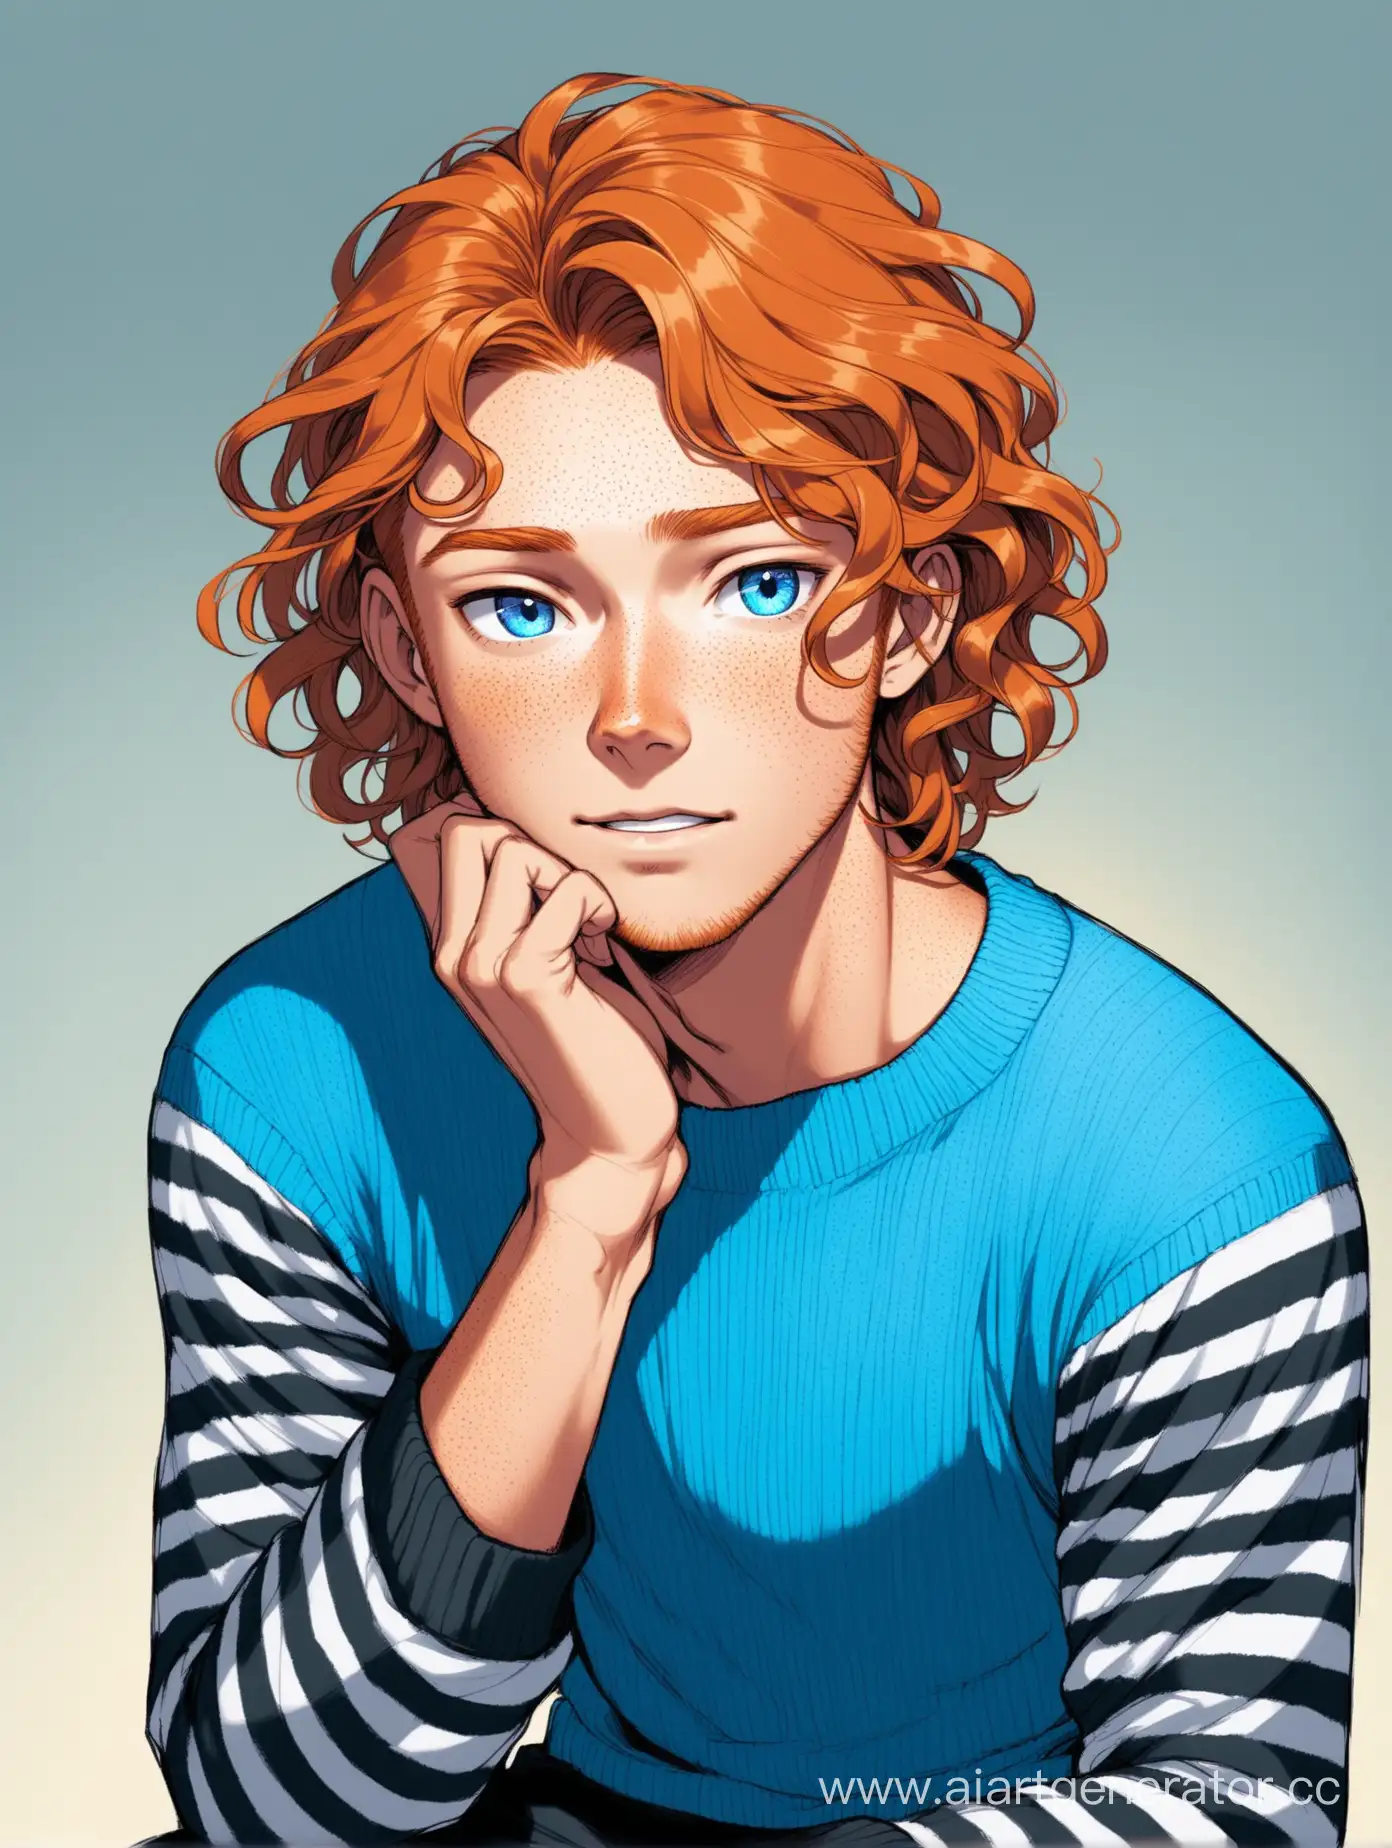 Vibrant-Curly-GingerHaired-Guy-in-Striped-Sweater-and-Freckles